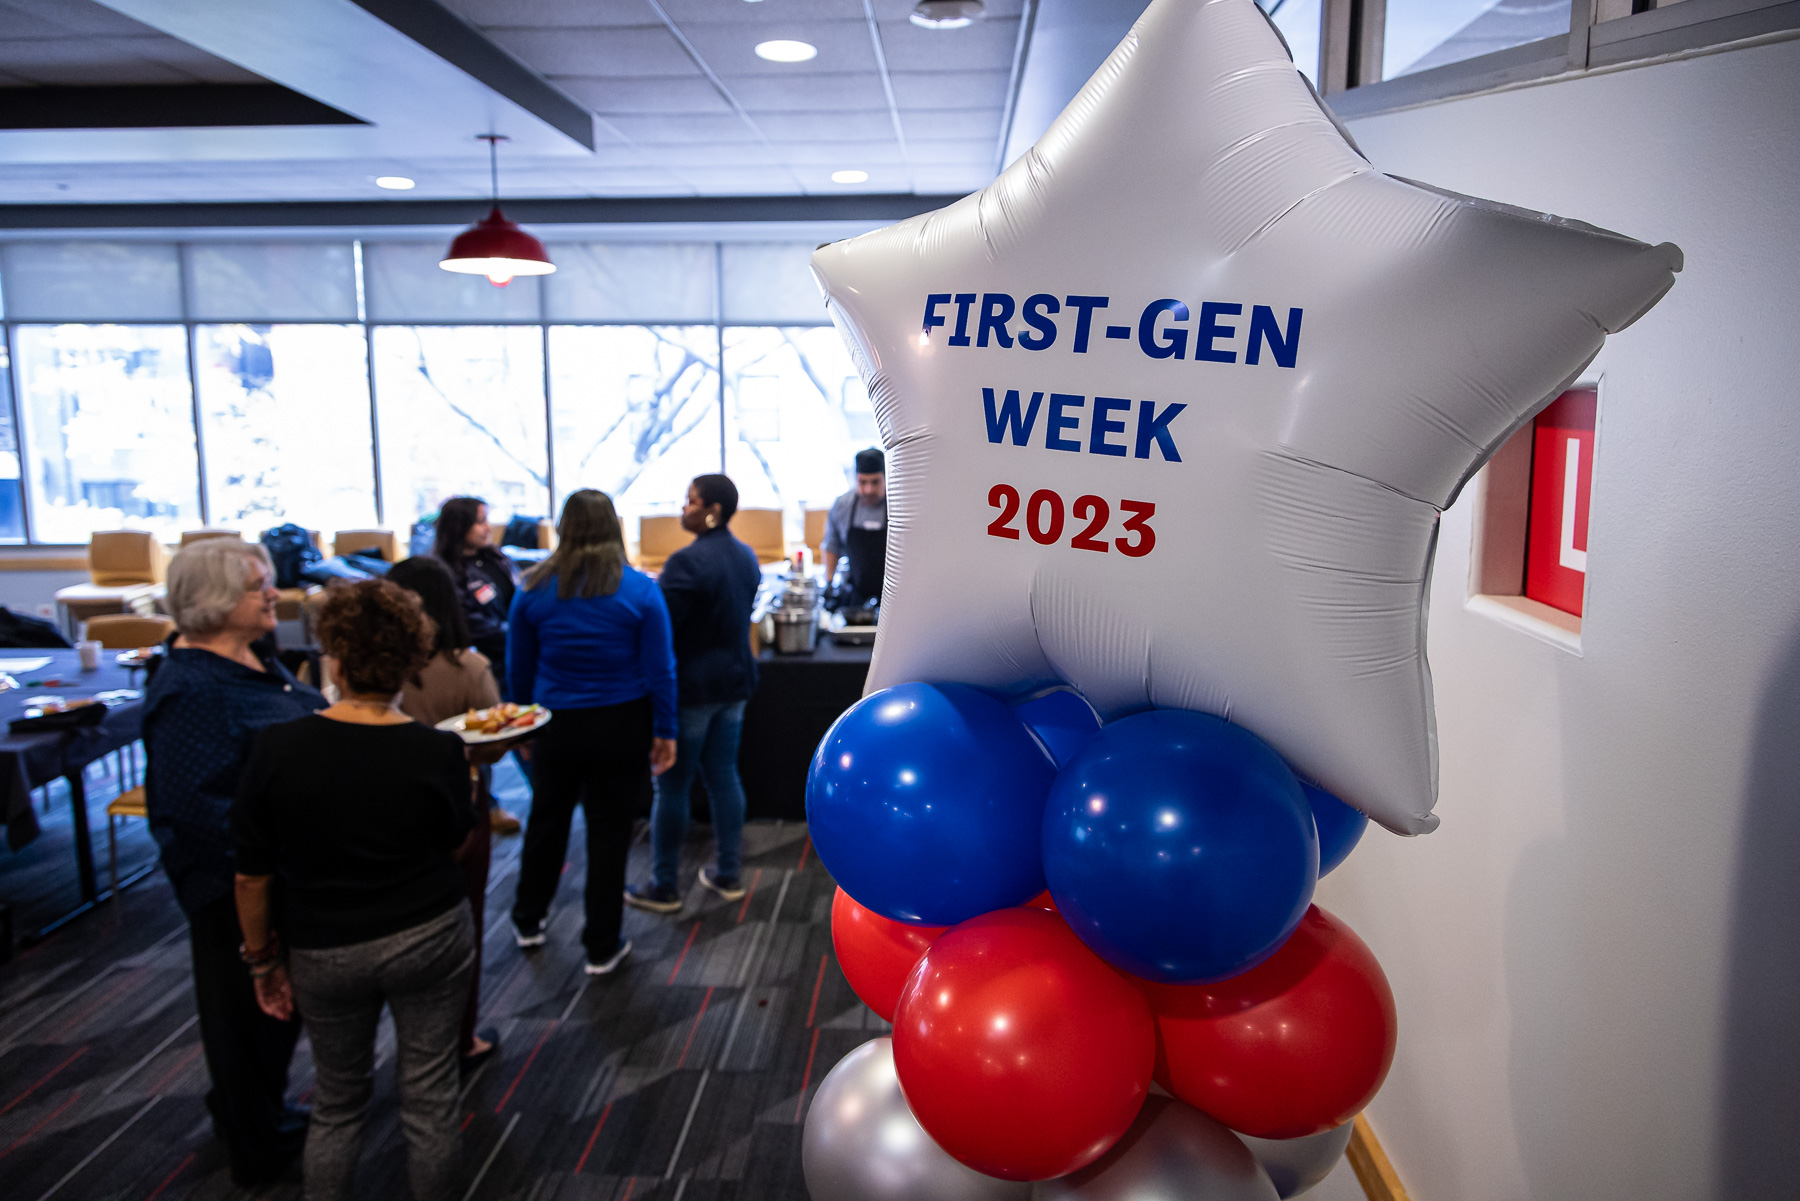 The week began with the "I Am F1rst Breakfast" on Monday in the Lincoln Park Student Center. (Photo by Jeff Carrion / DePaul University)